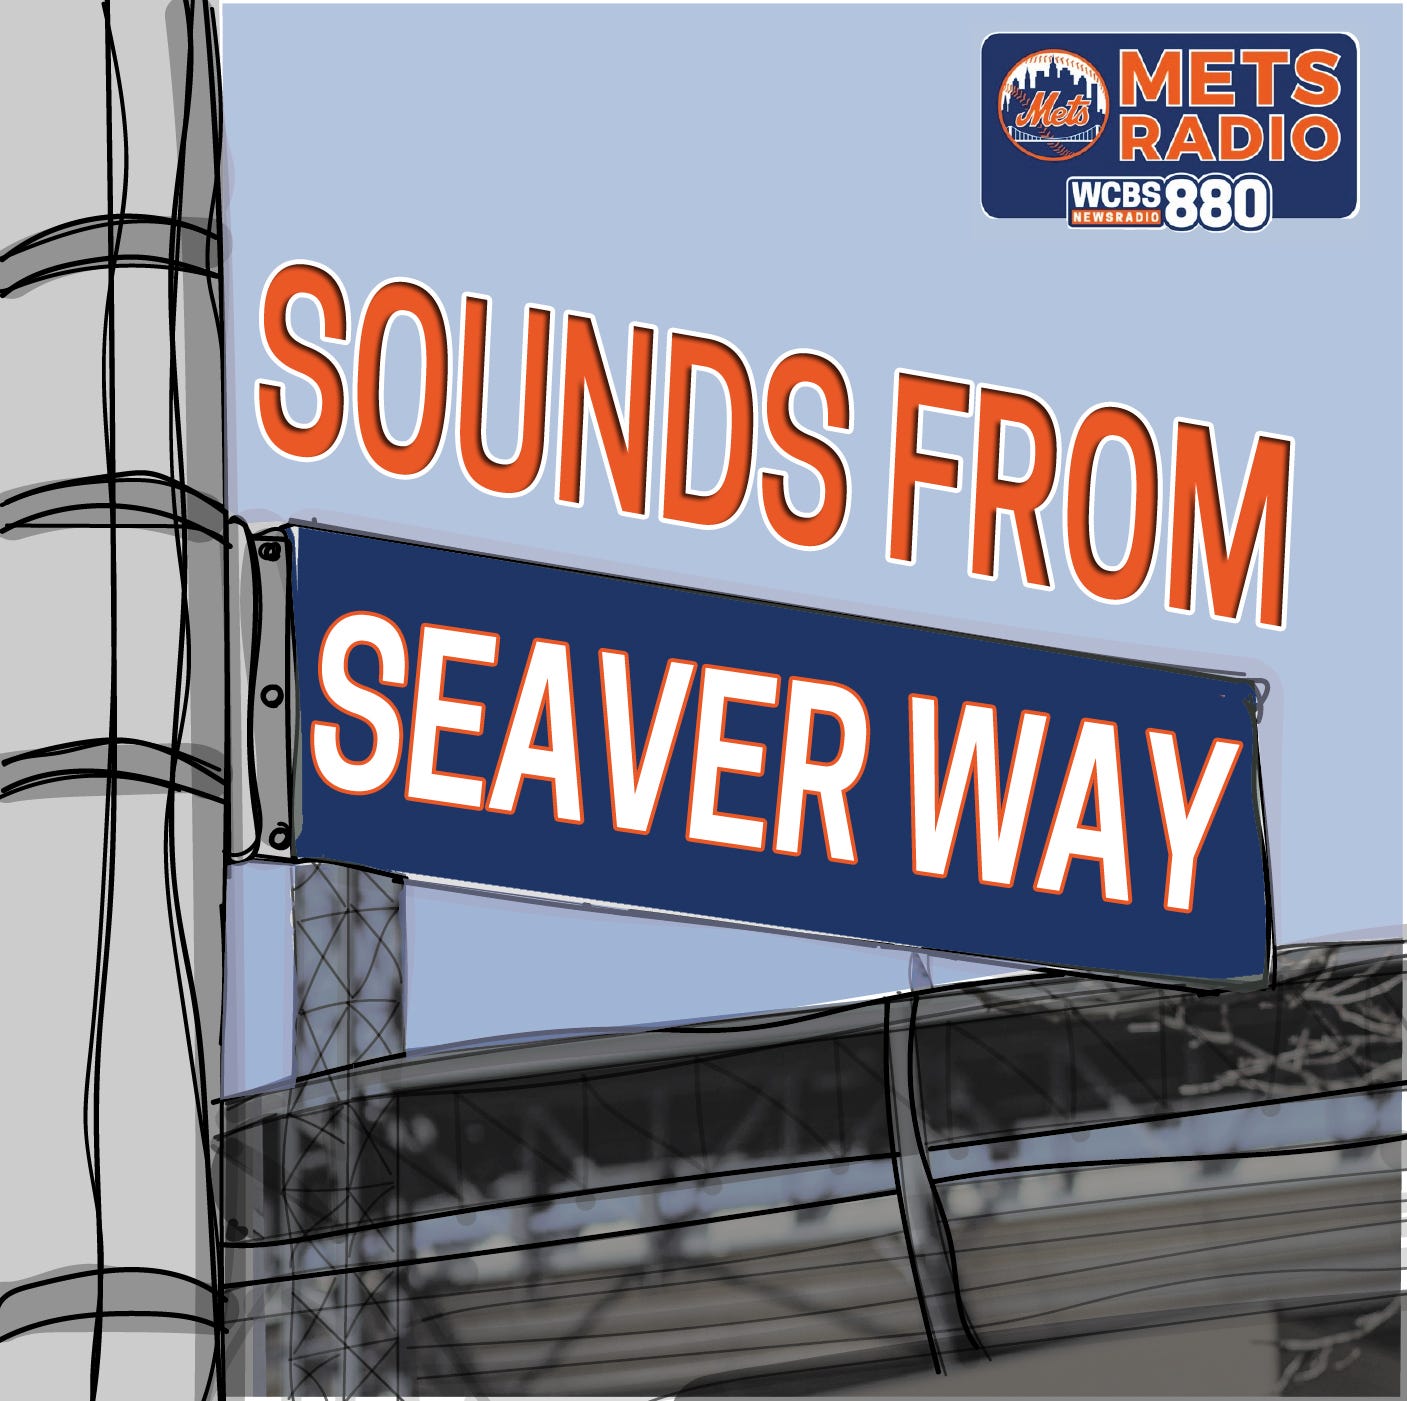 Giants 8, Mets 7 - Friday, May 24th